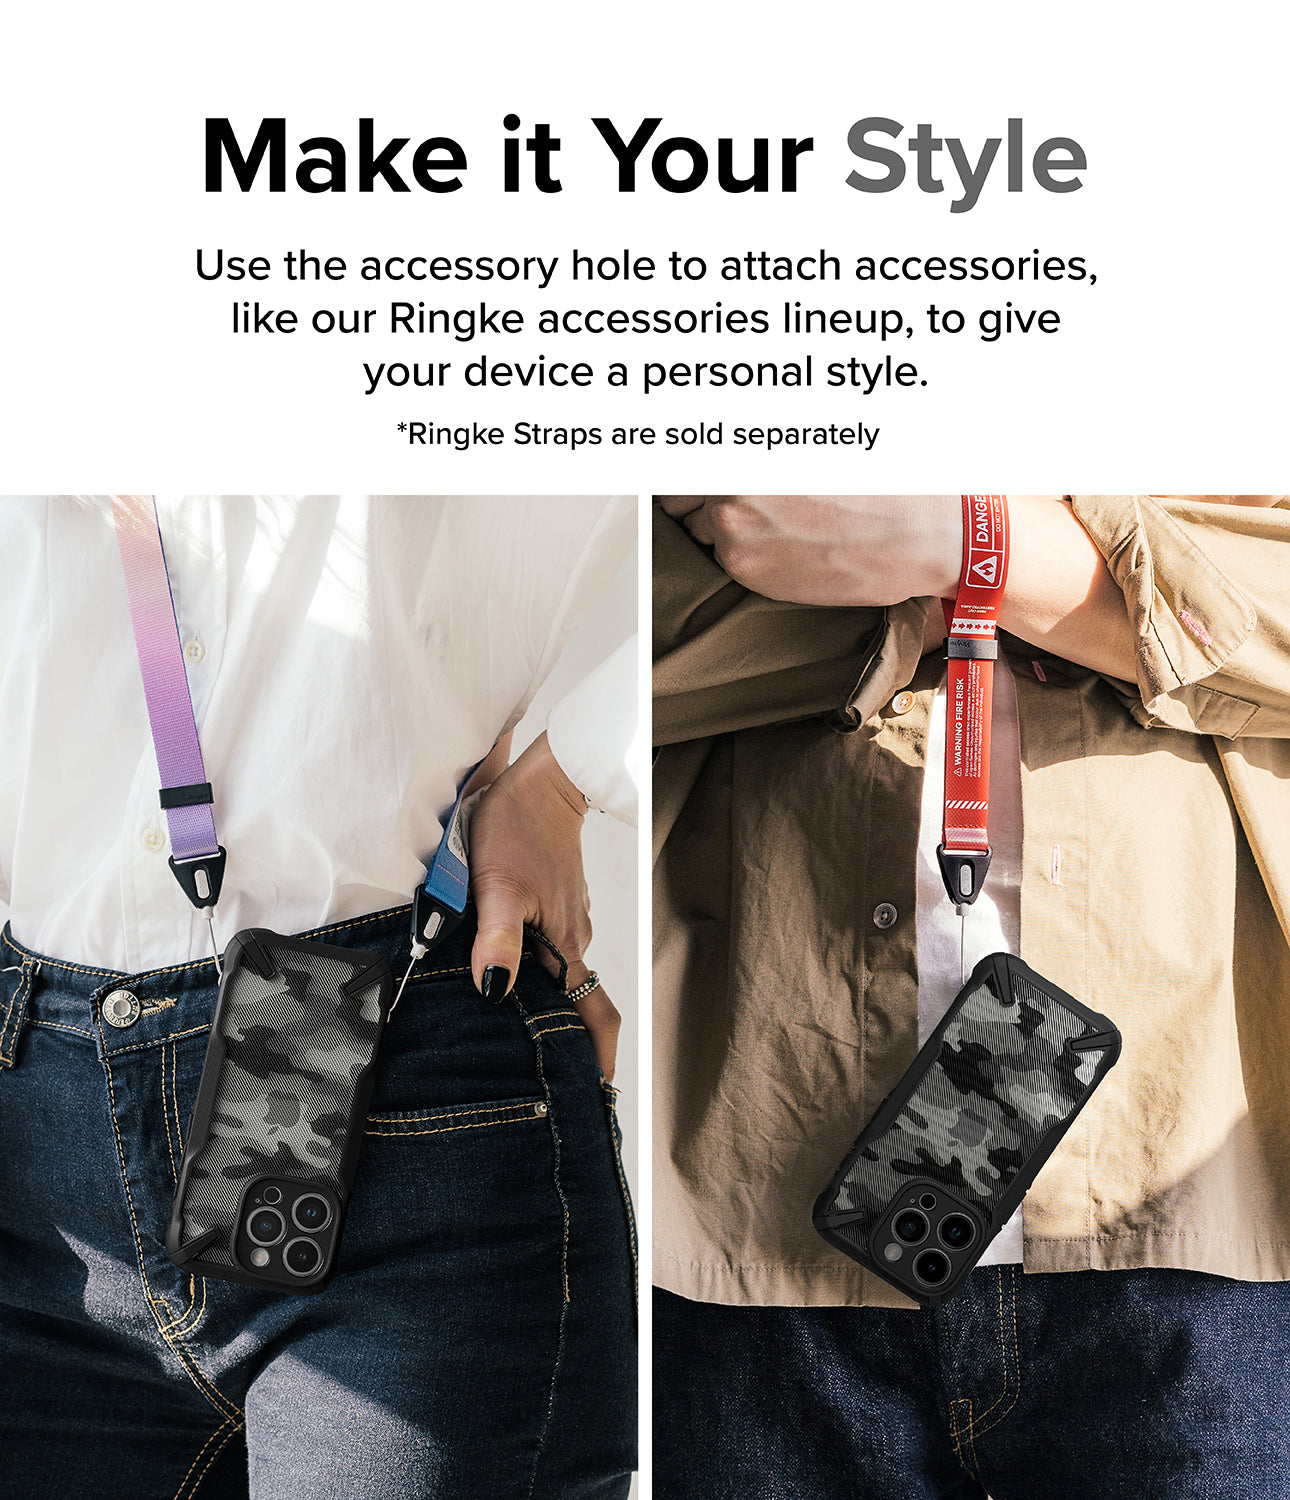 iPhone 15 Pro Case | Fusion-X - Camo Black - Make it Your Style. Use the accessory hole to attach accessories, like our Ringke accessories lineup, to give your device a personal style.